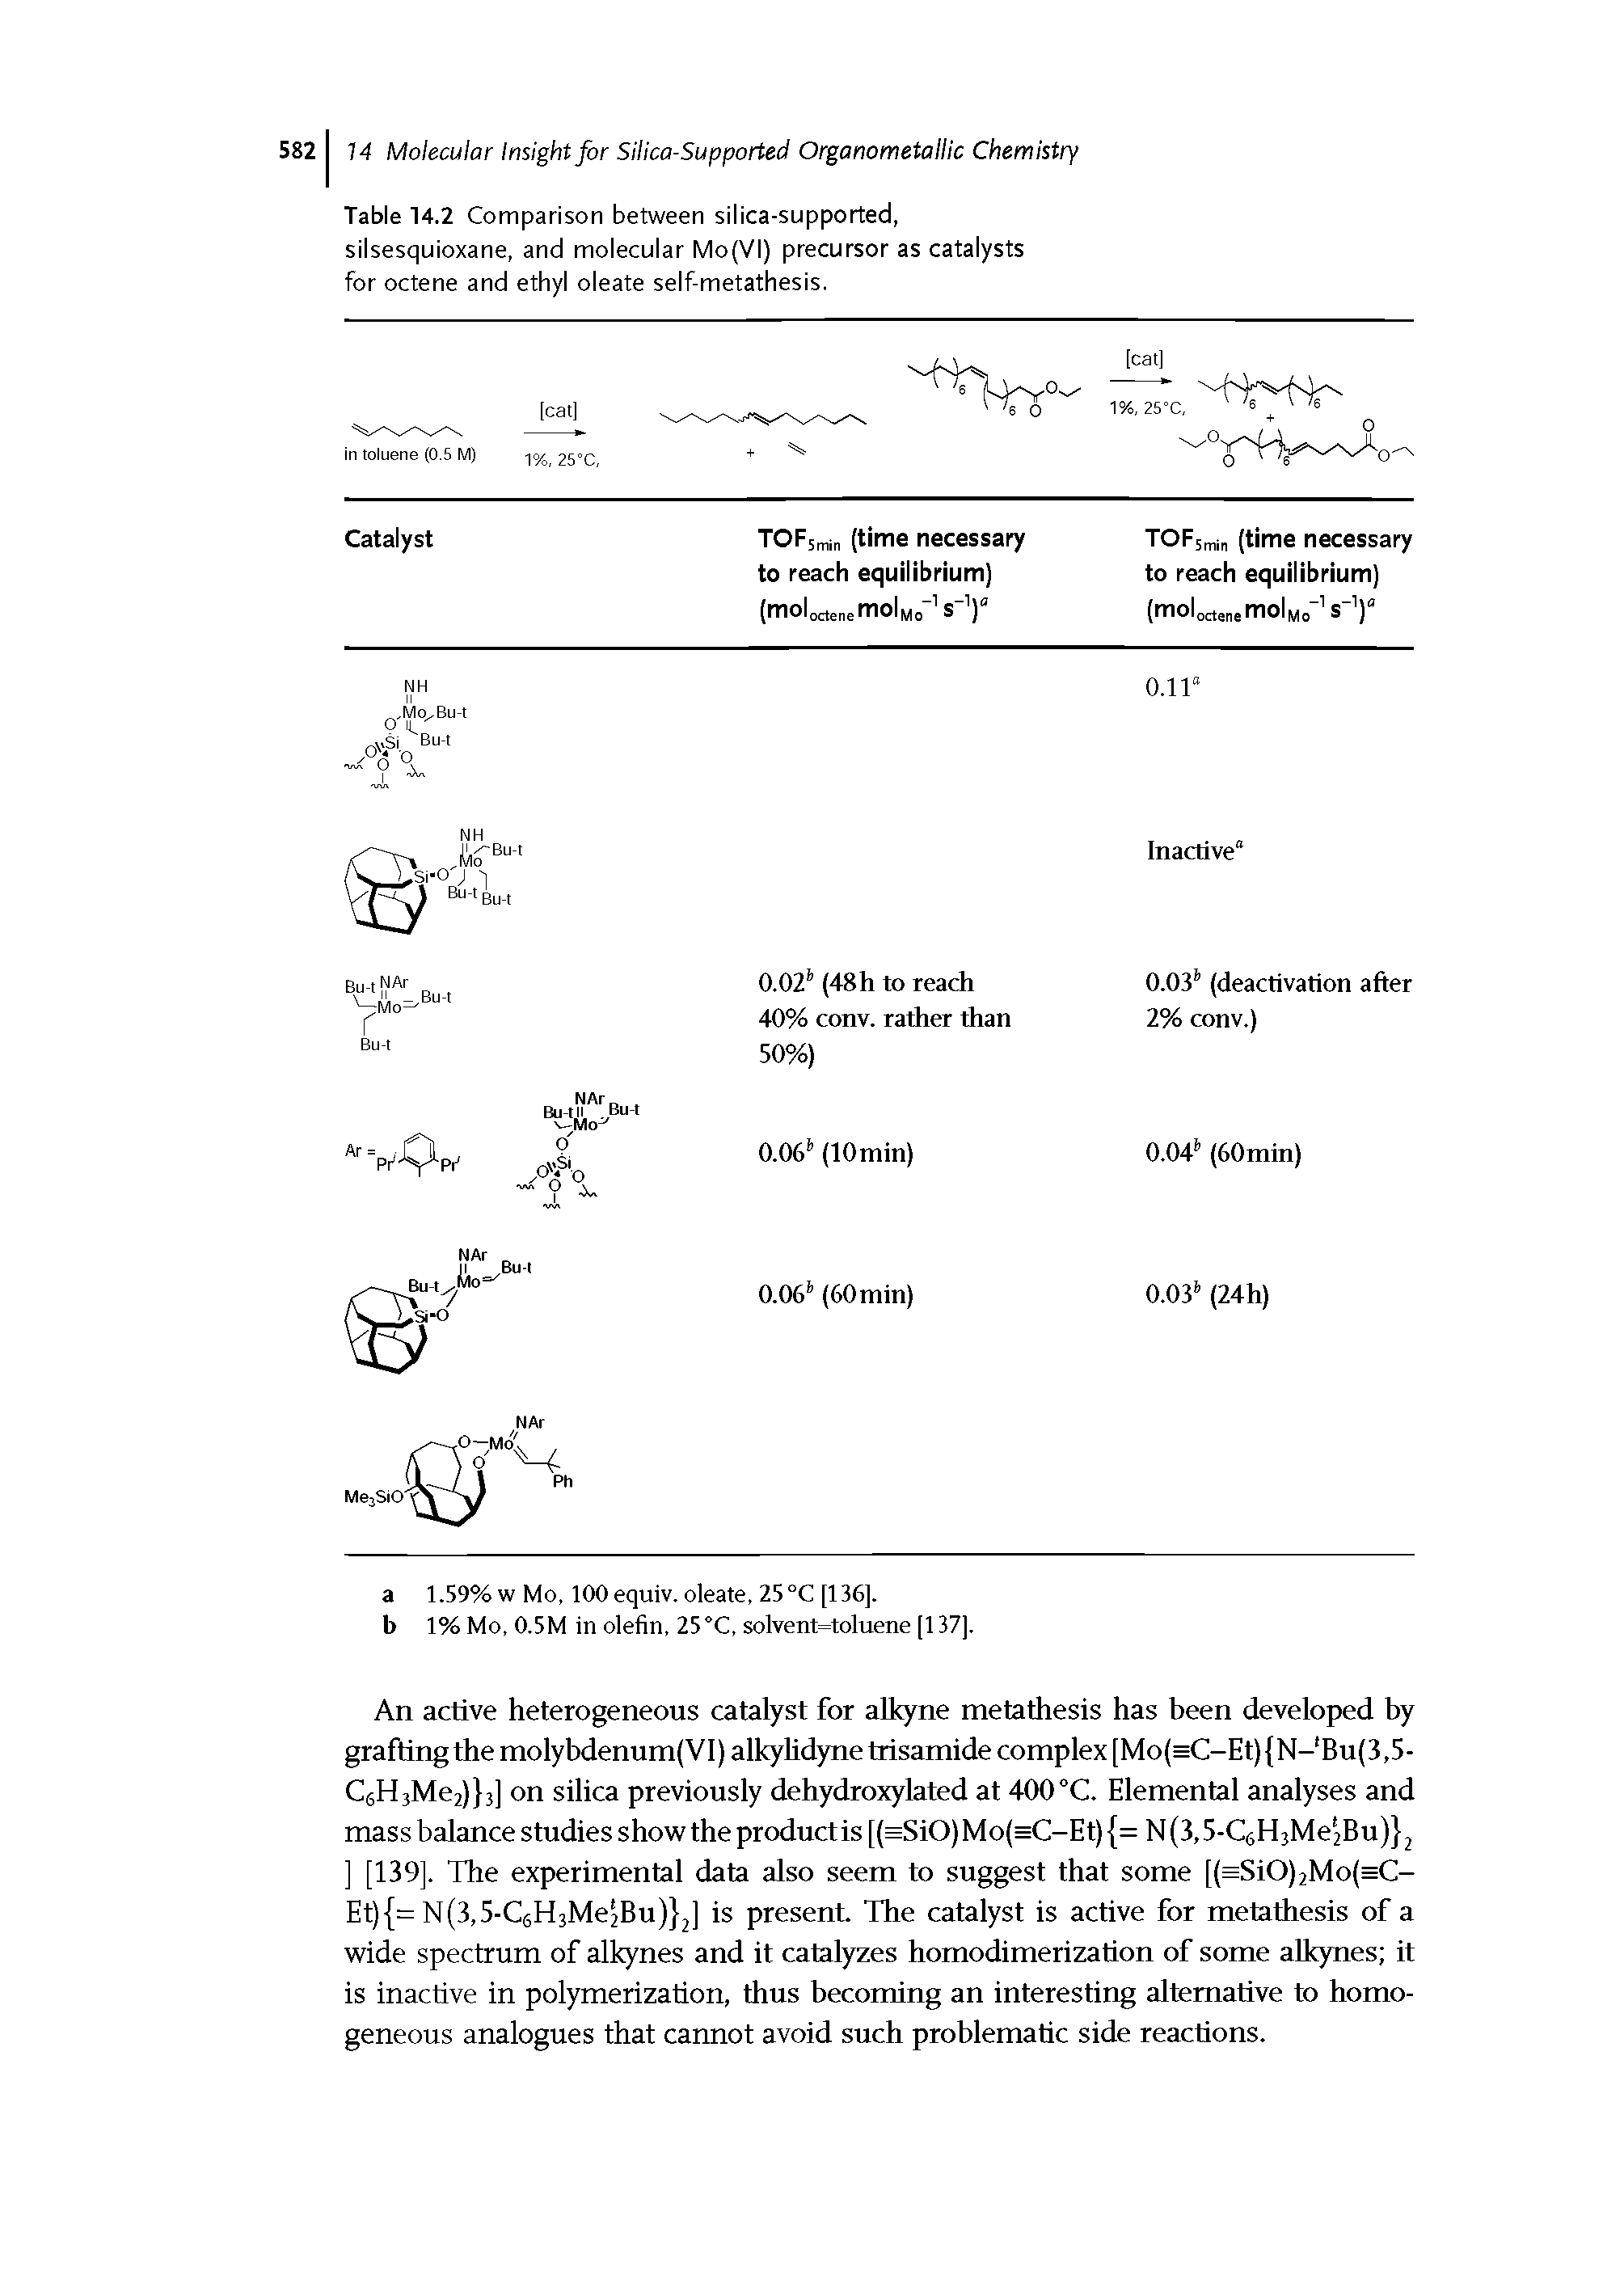 Table 14.2 Comparison between silica-supported, silsesquioxane, and molecular Mo(VI) precursor as catalysts for octene and ethyl oleate self-metathesis.